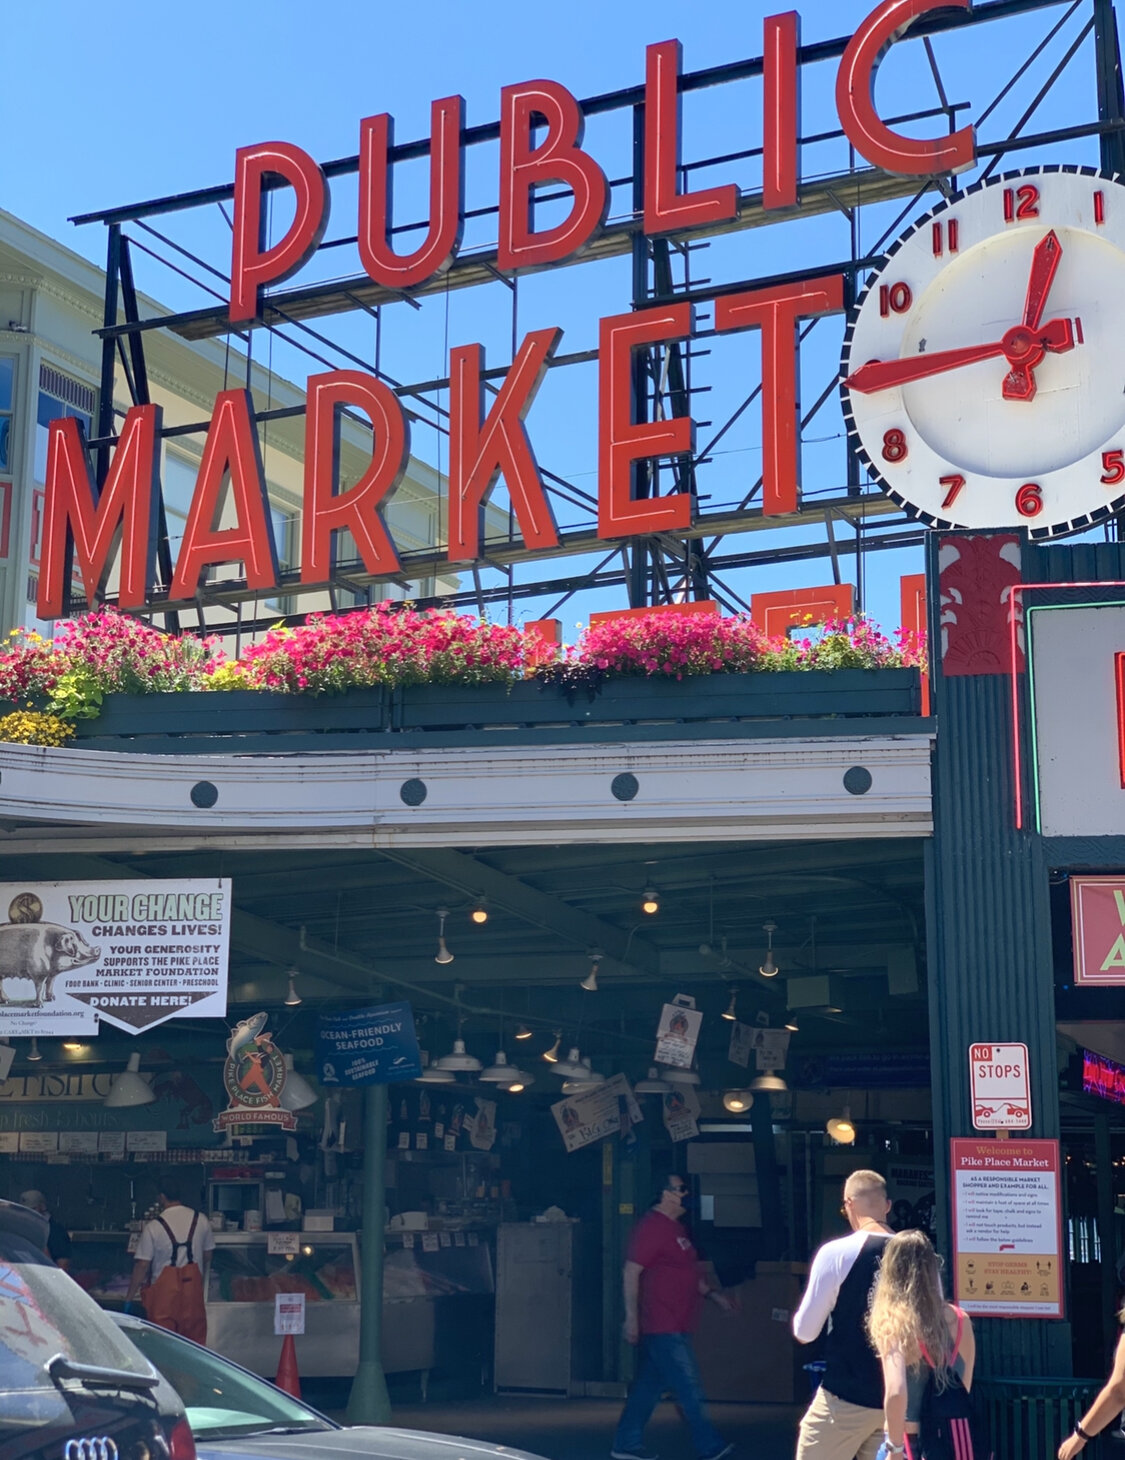  Public Market Center officially started on August 17, 1907, with around ten farmers coming to town to trade produce from their wagons. Today, Pike Place Market is one of the oldest continuously operating farmers’ markets in America, and is a Seattle